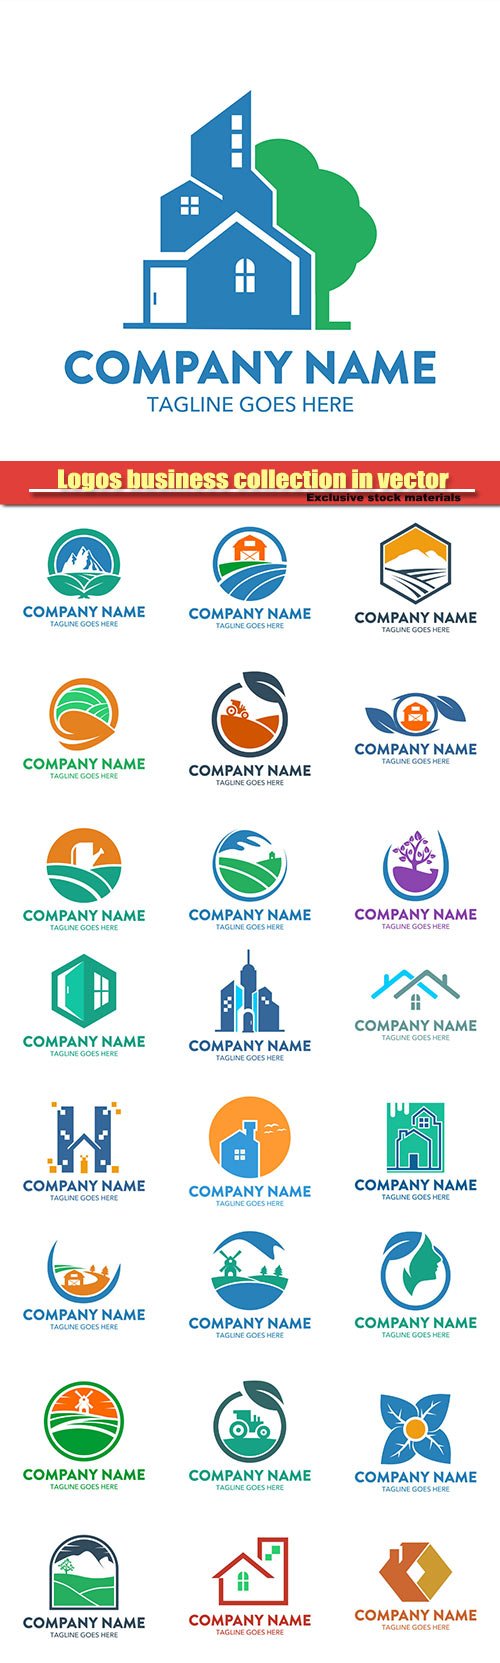 Logos business collection in vector #28